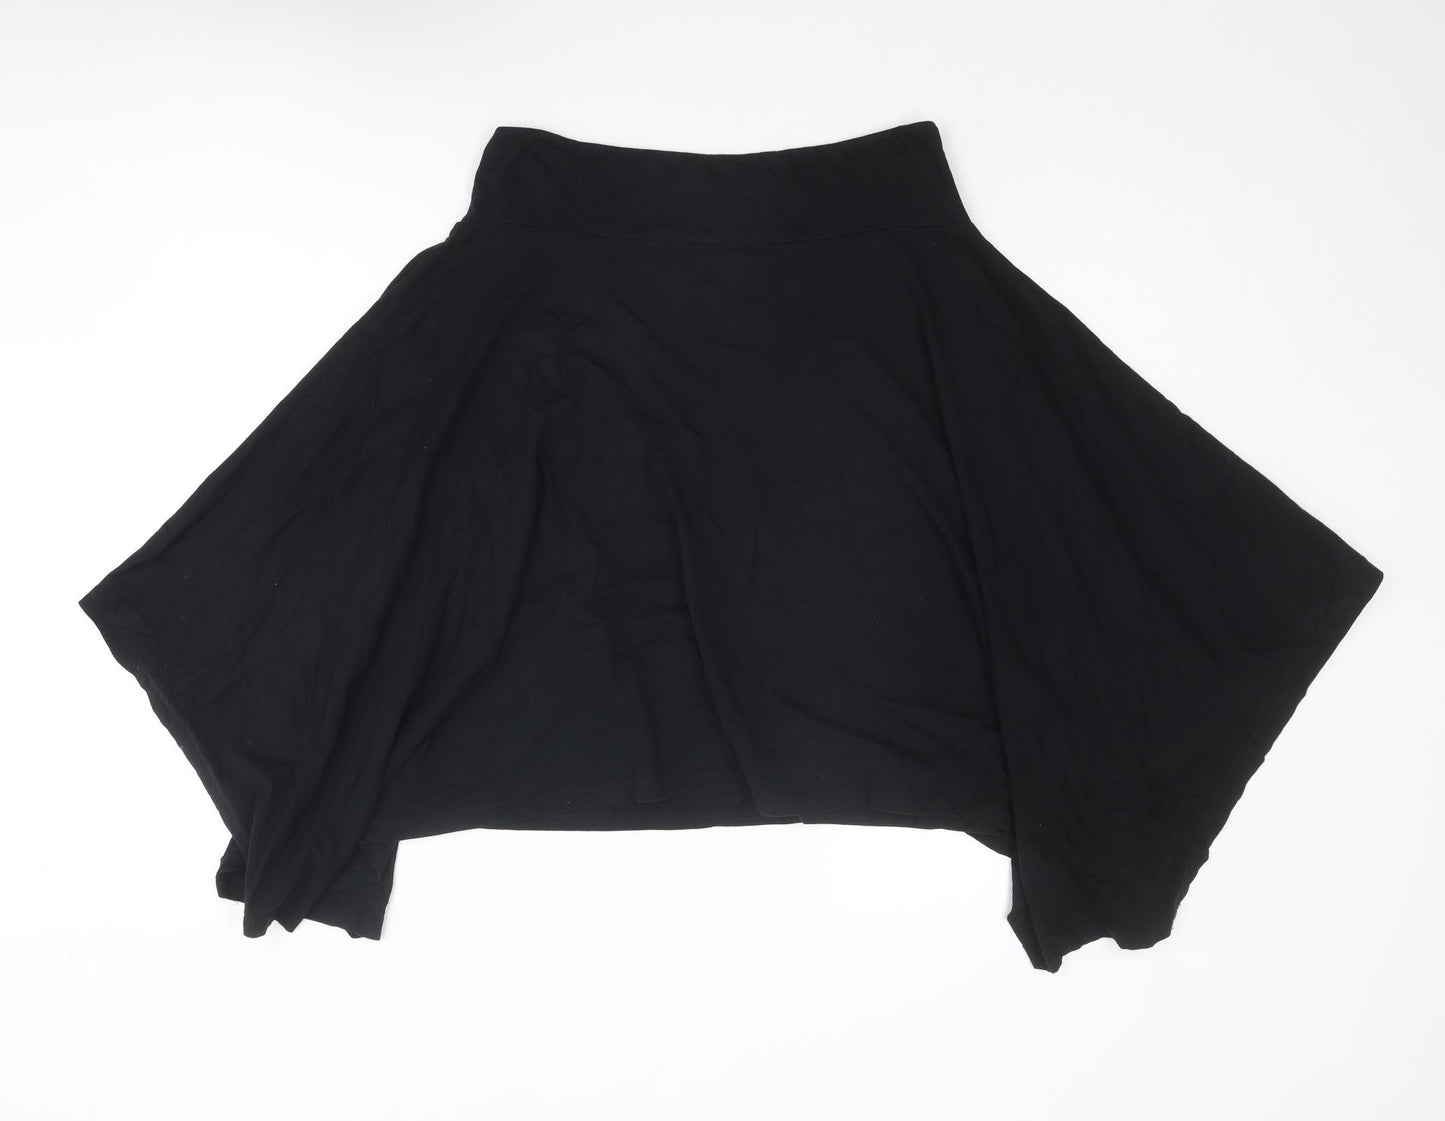 Marks and Spencer Womens Black Cotton Swing Skirt Size 12